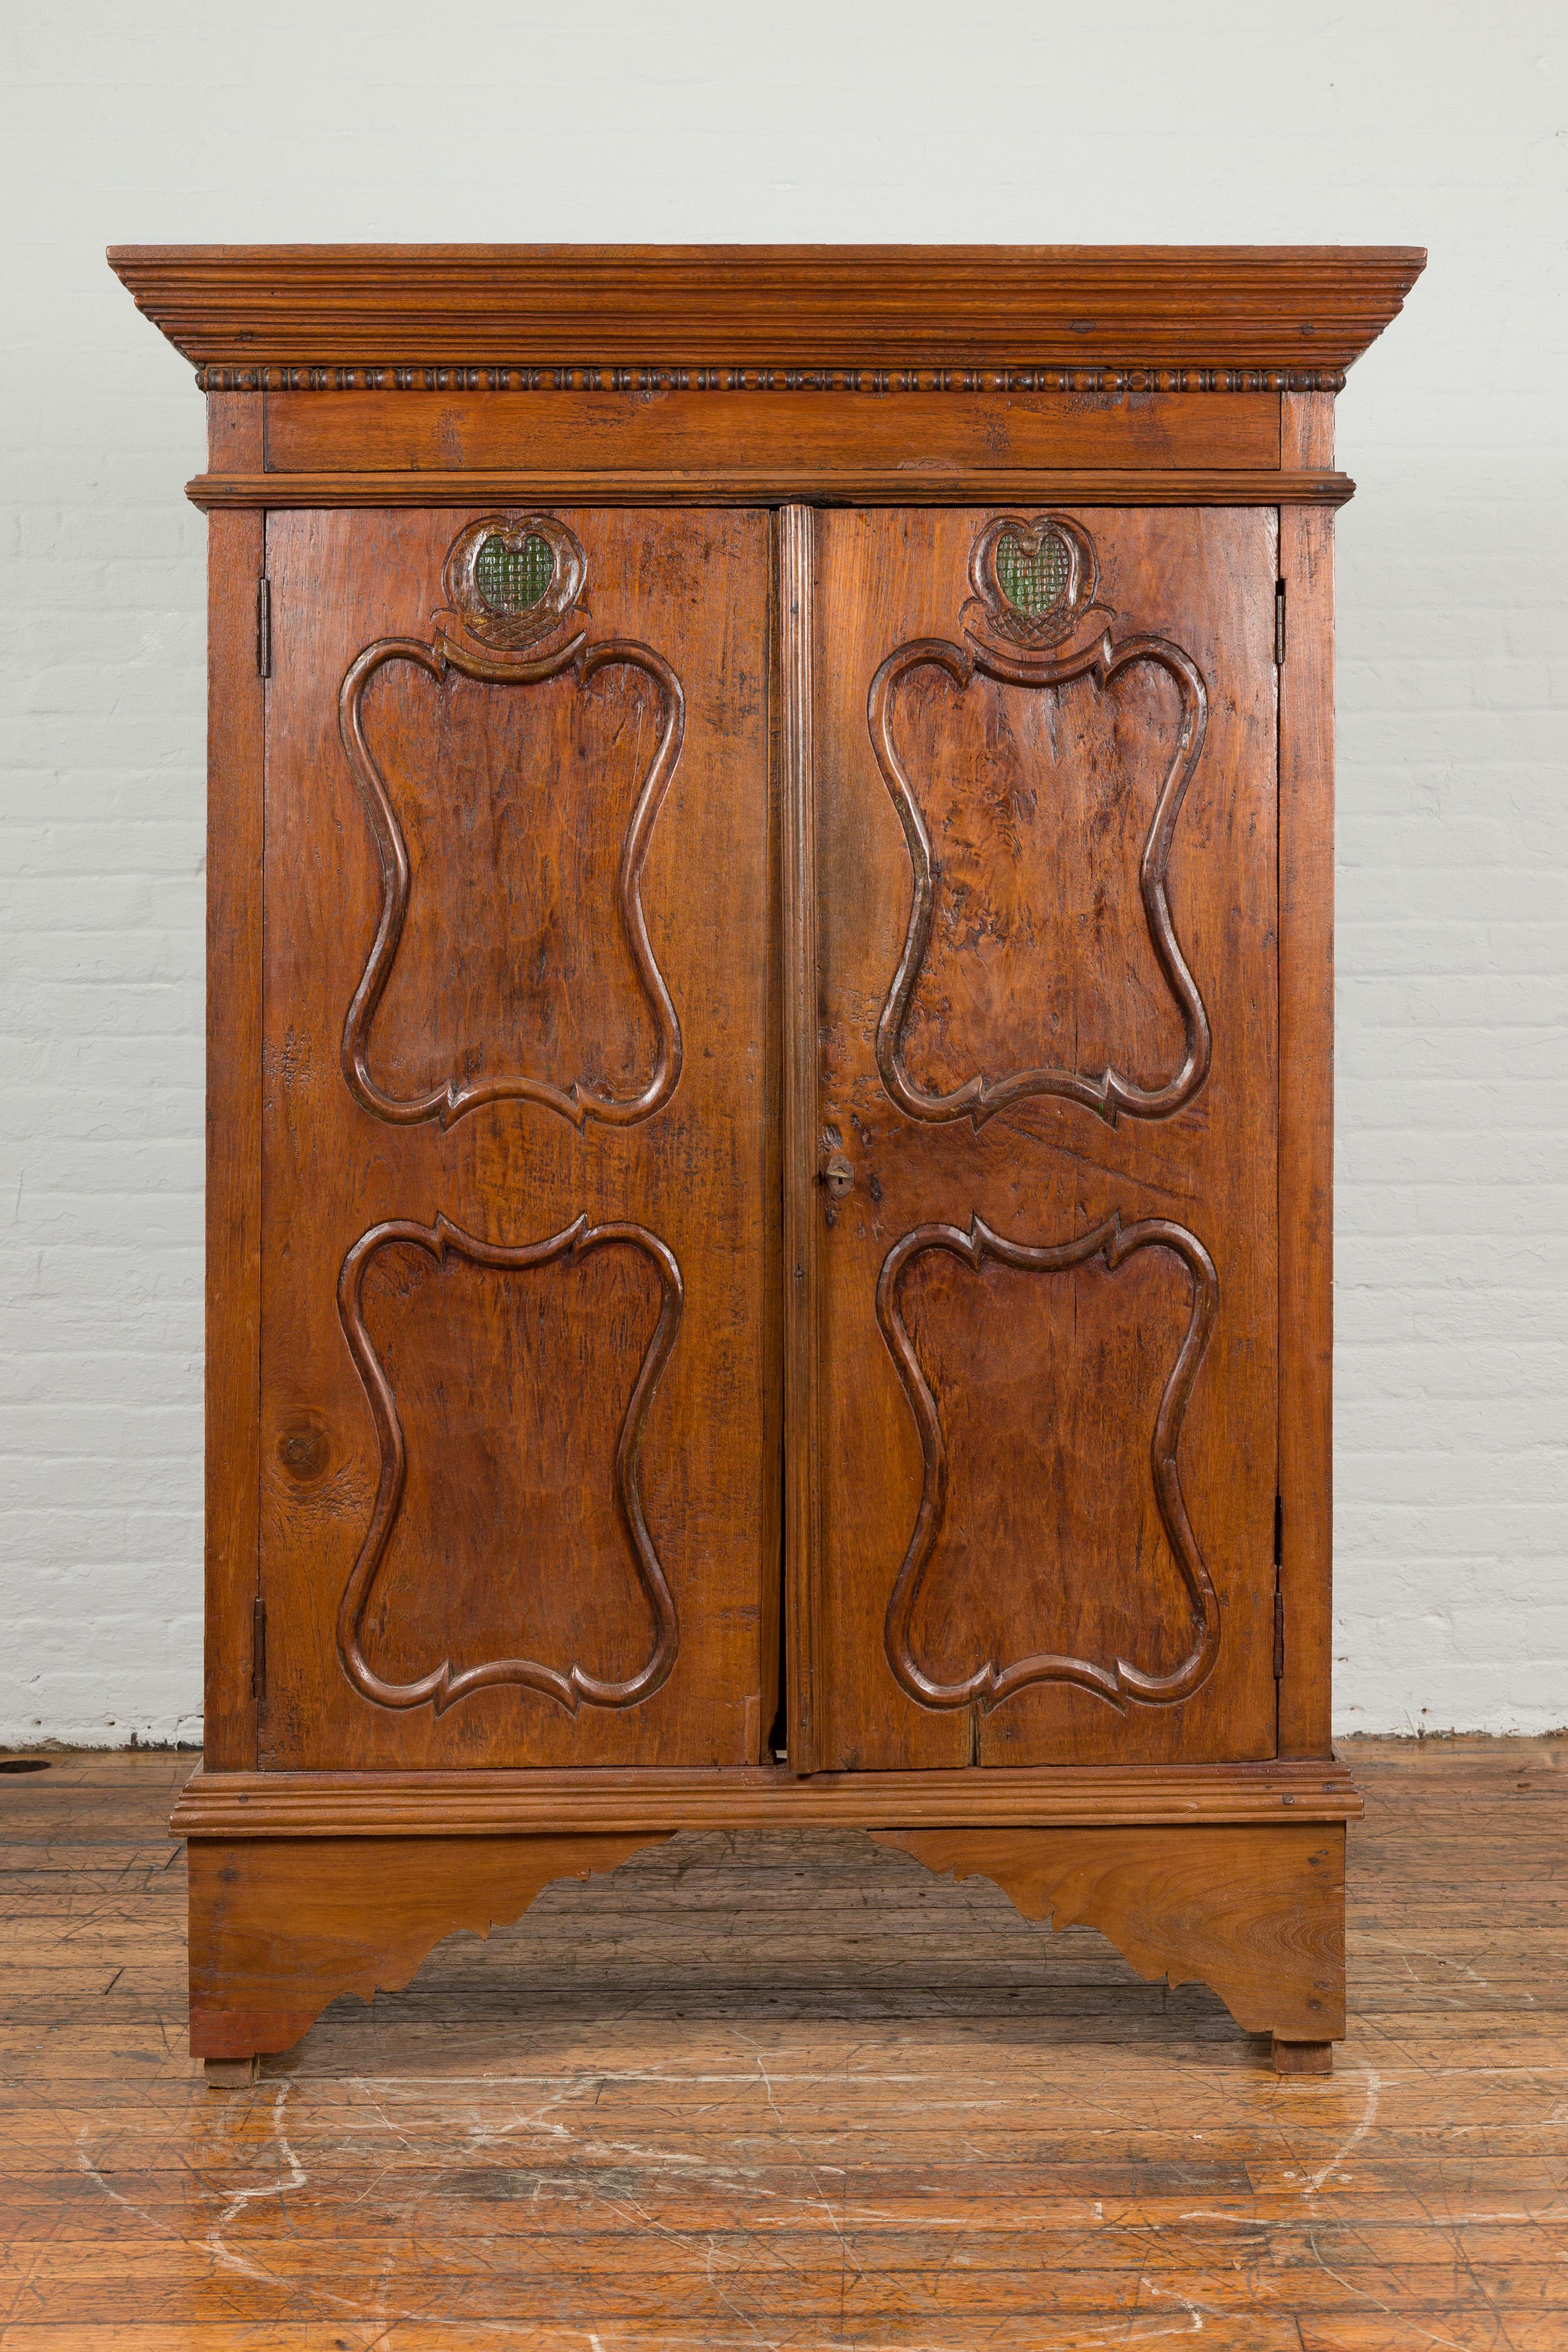 An Indonesian teak wood cabinet from the early 20th century, with carved panels and bracket feet. Created in Indonesia during the early years of the 20th century, this teak wood cabinet features a beveled cornice sitting above a spool style molding.